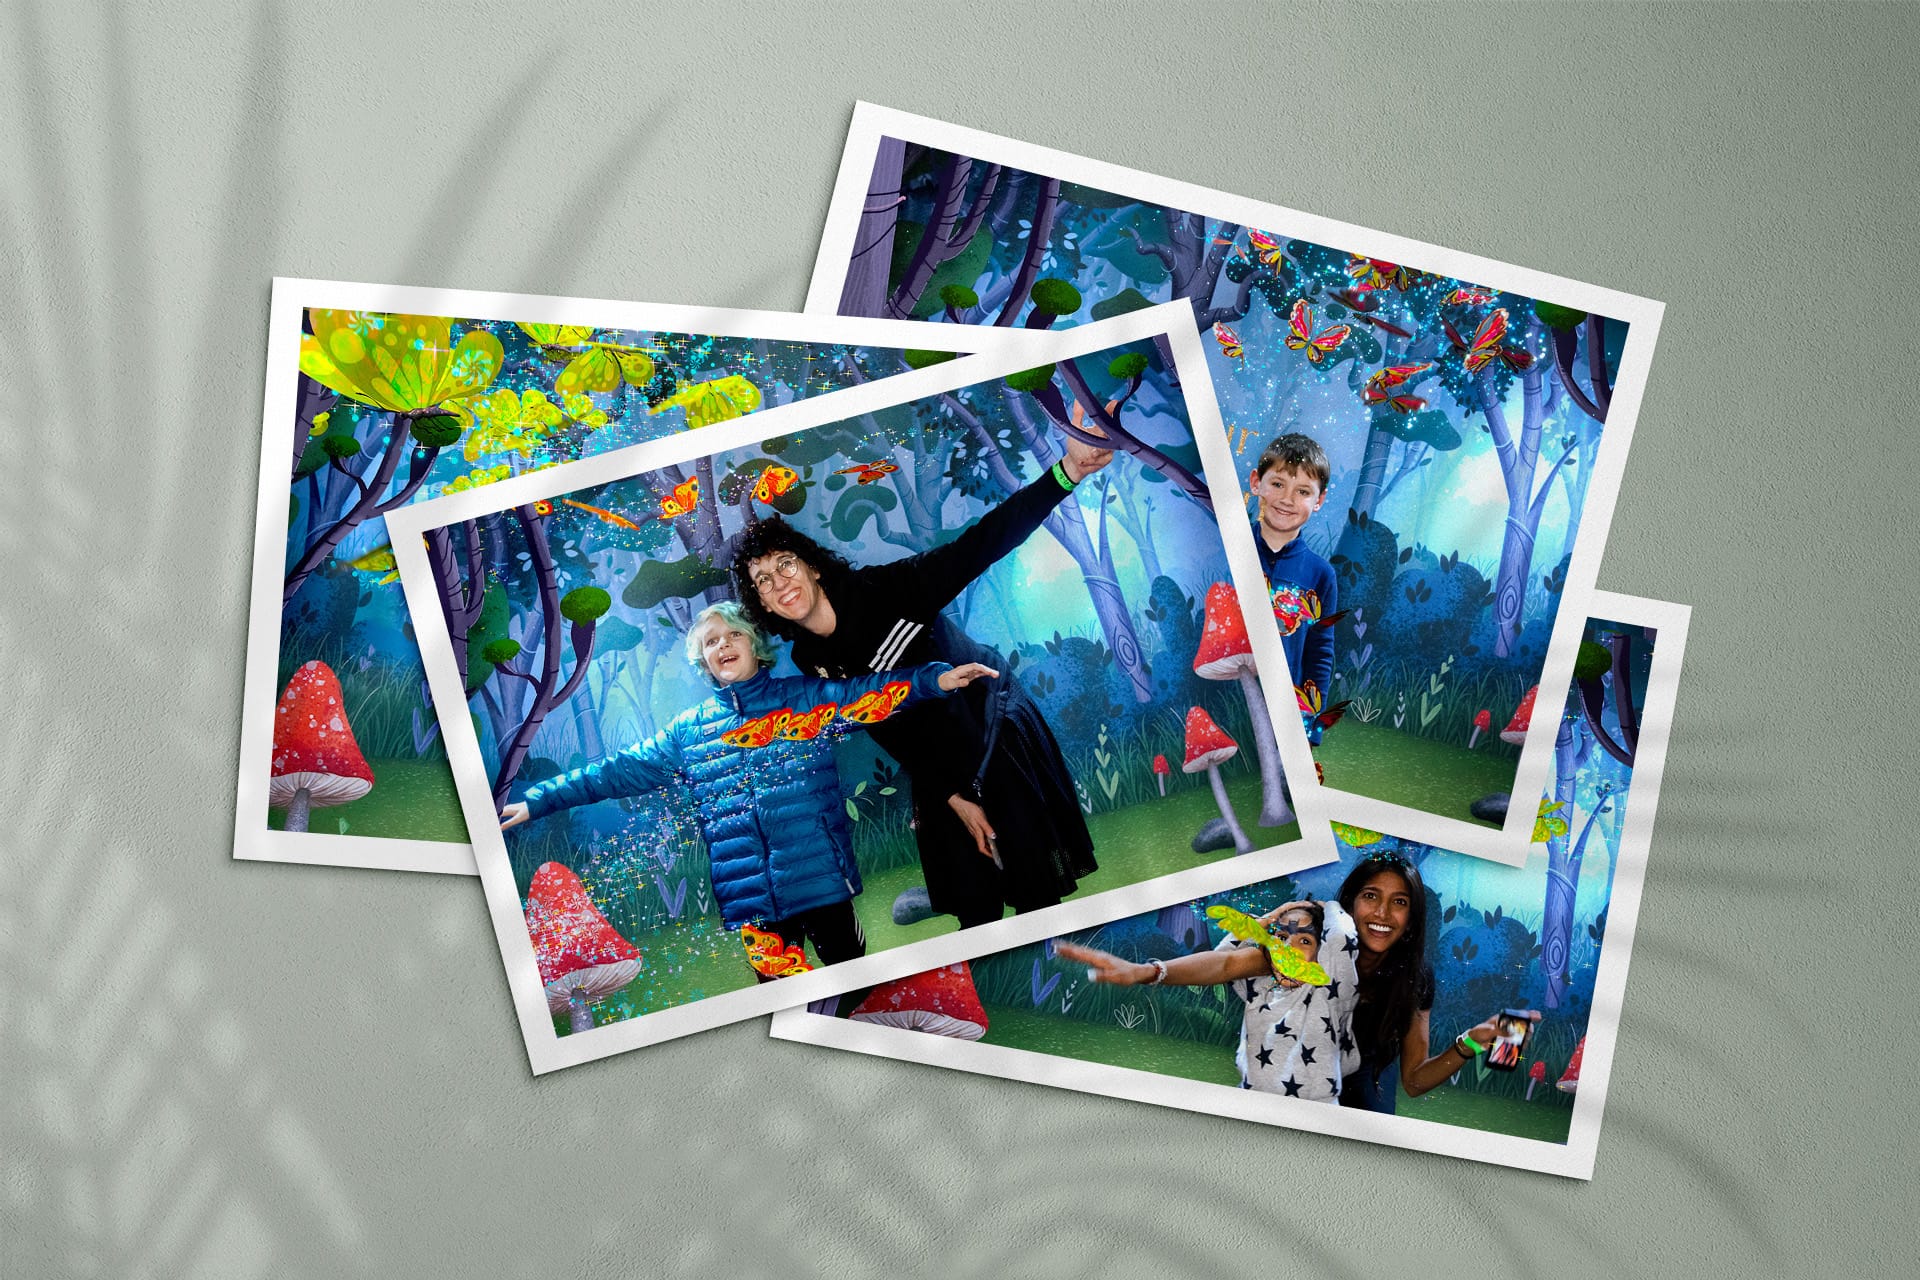 Four photo prints of families in the augmented reality butterfly photo booth